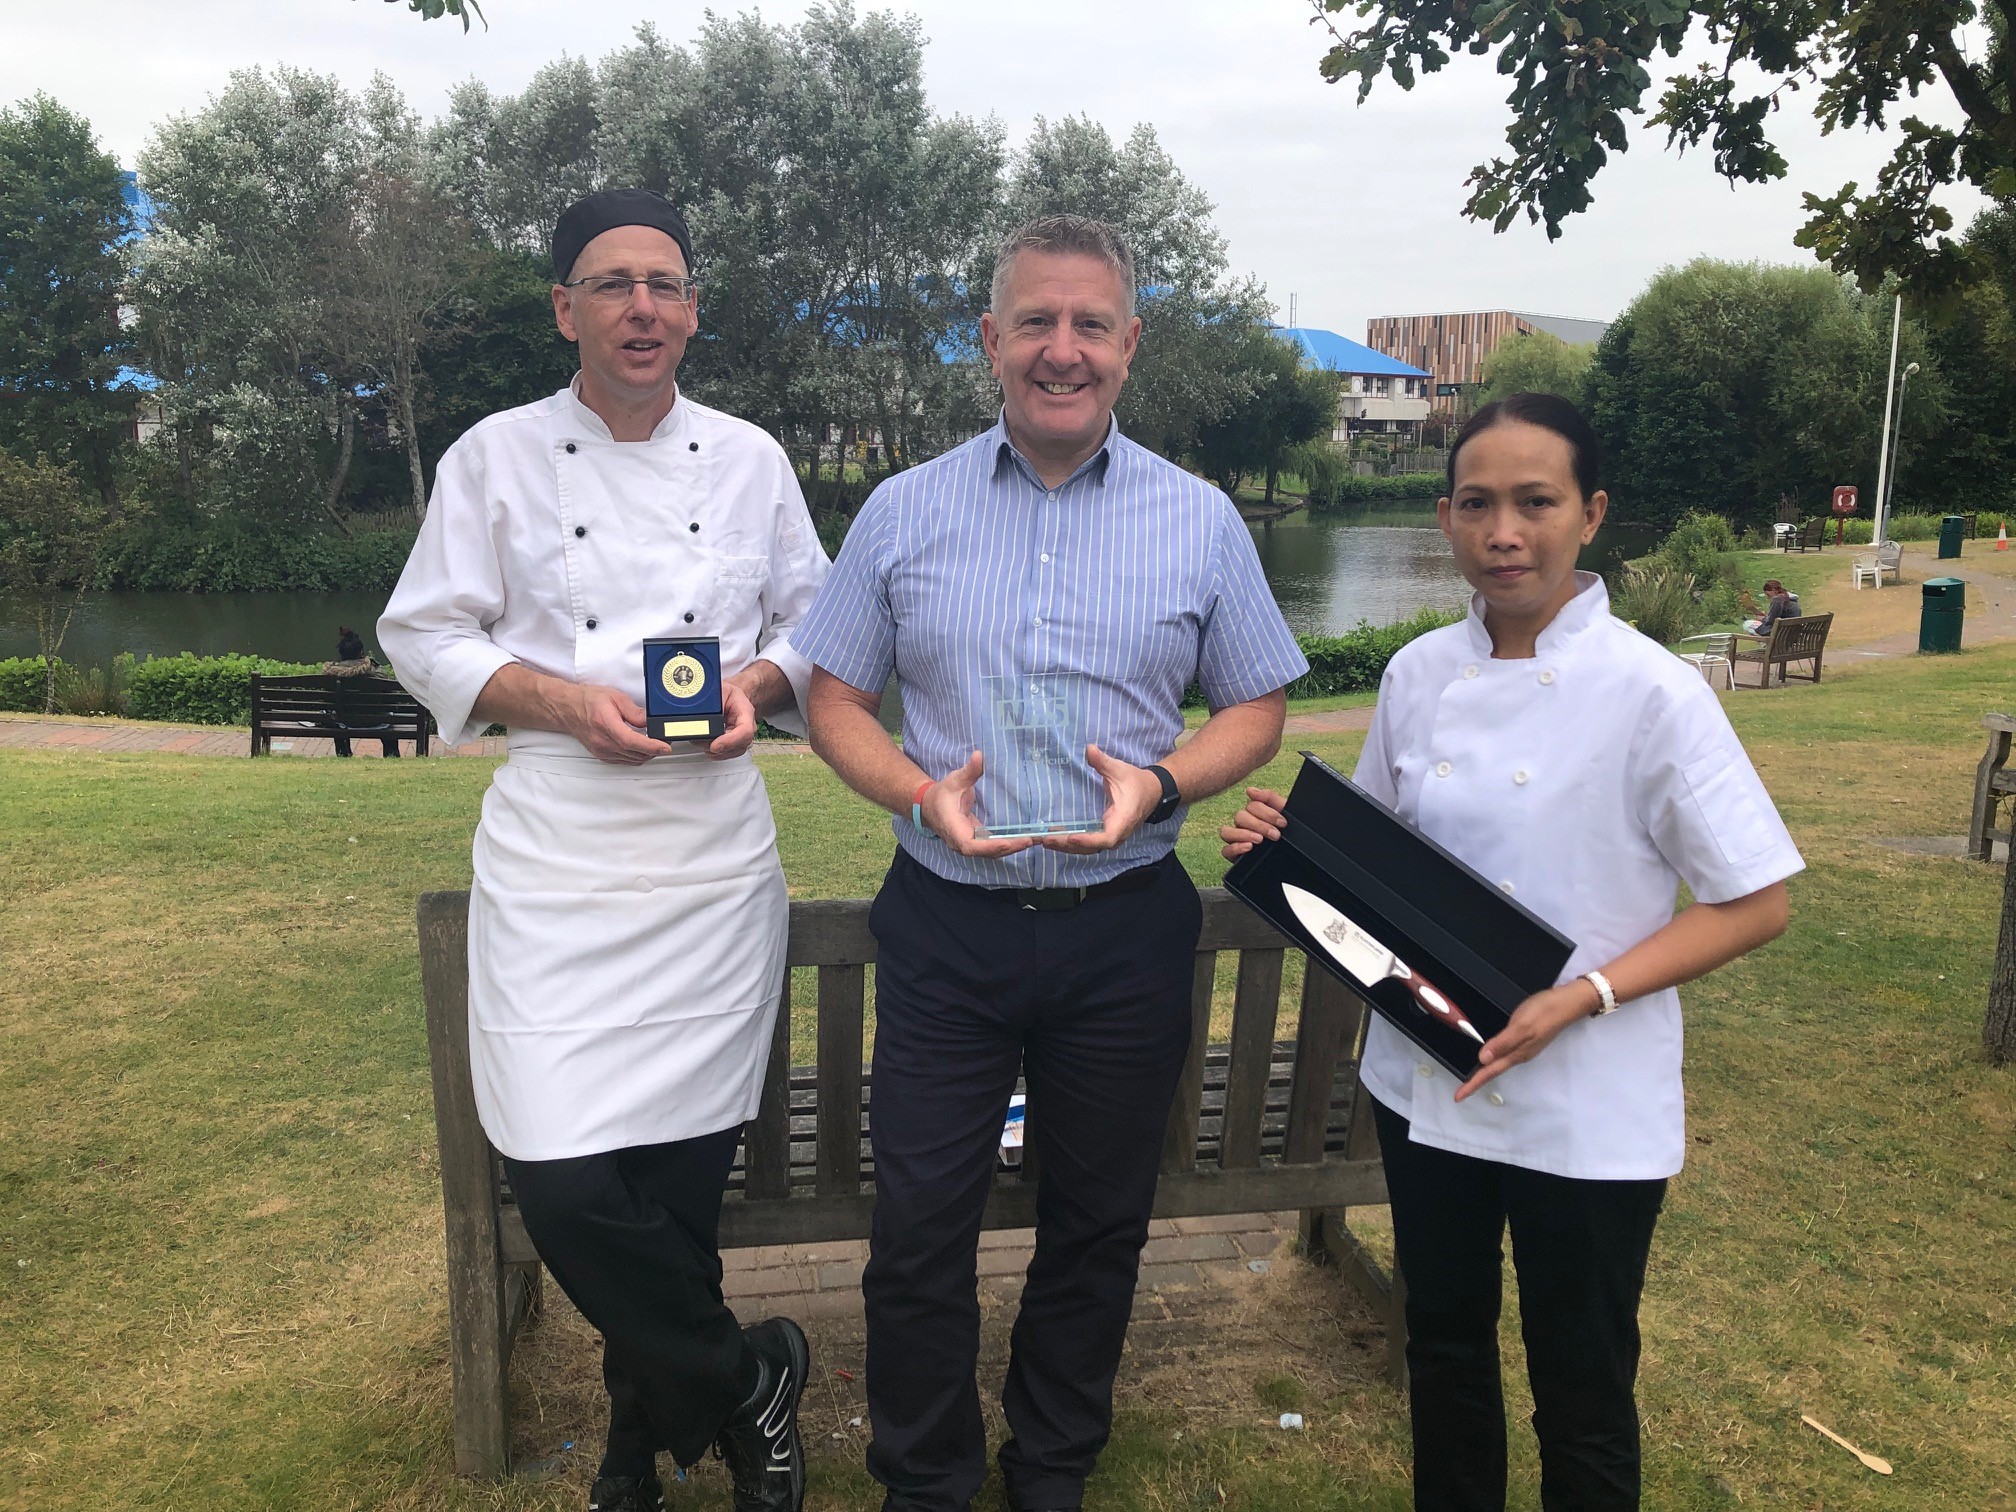 Hospital chefs win south west heats of NHS Chef of the Year